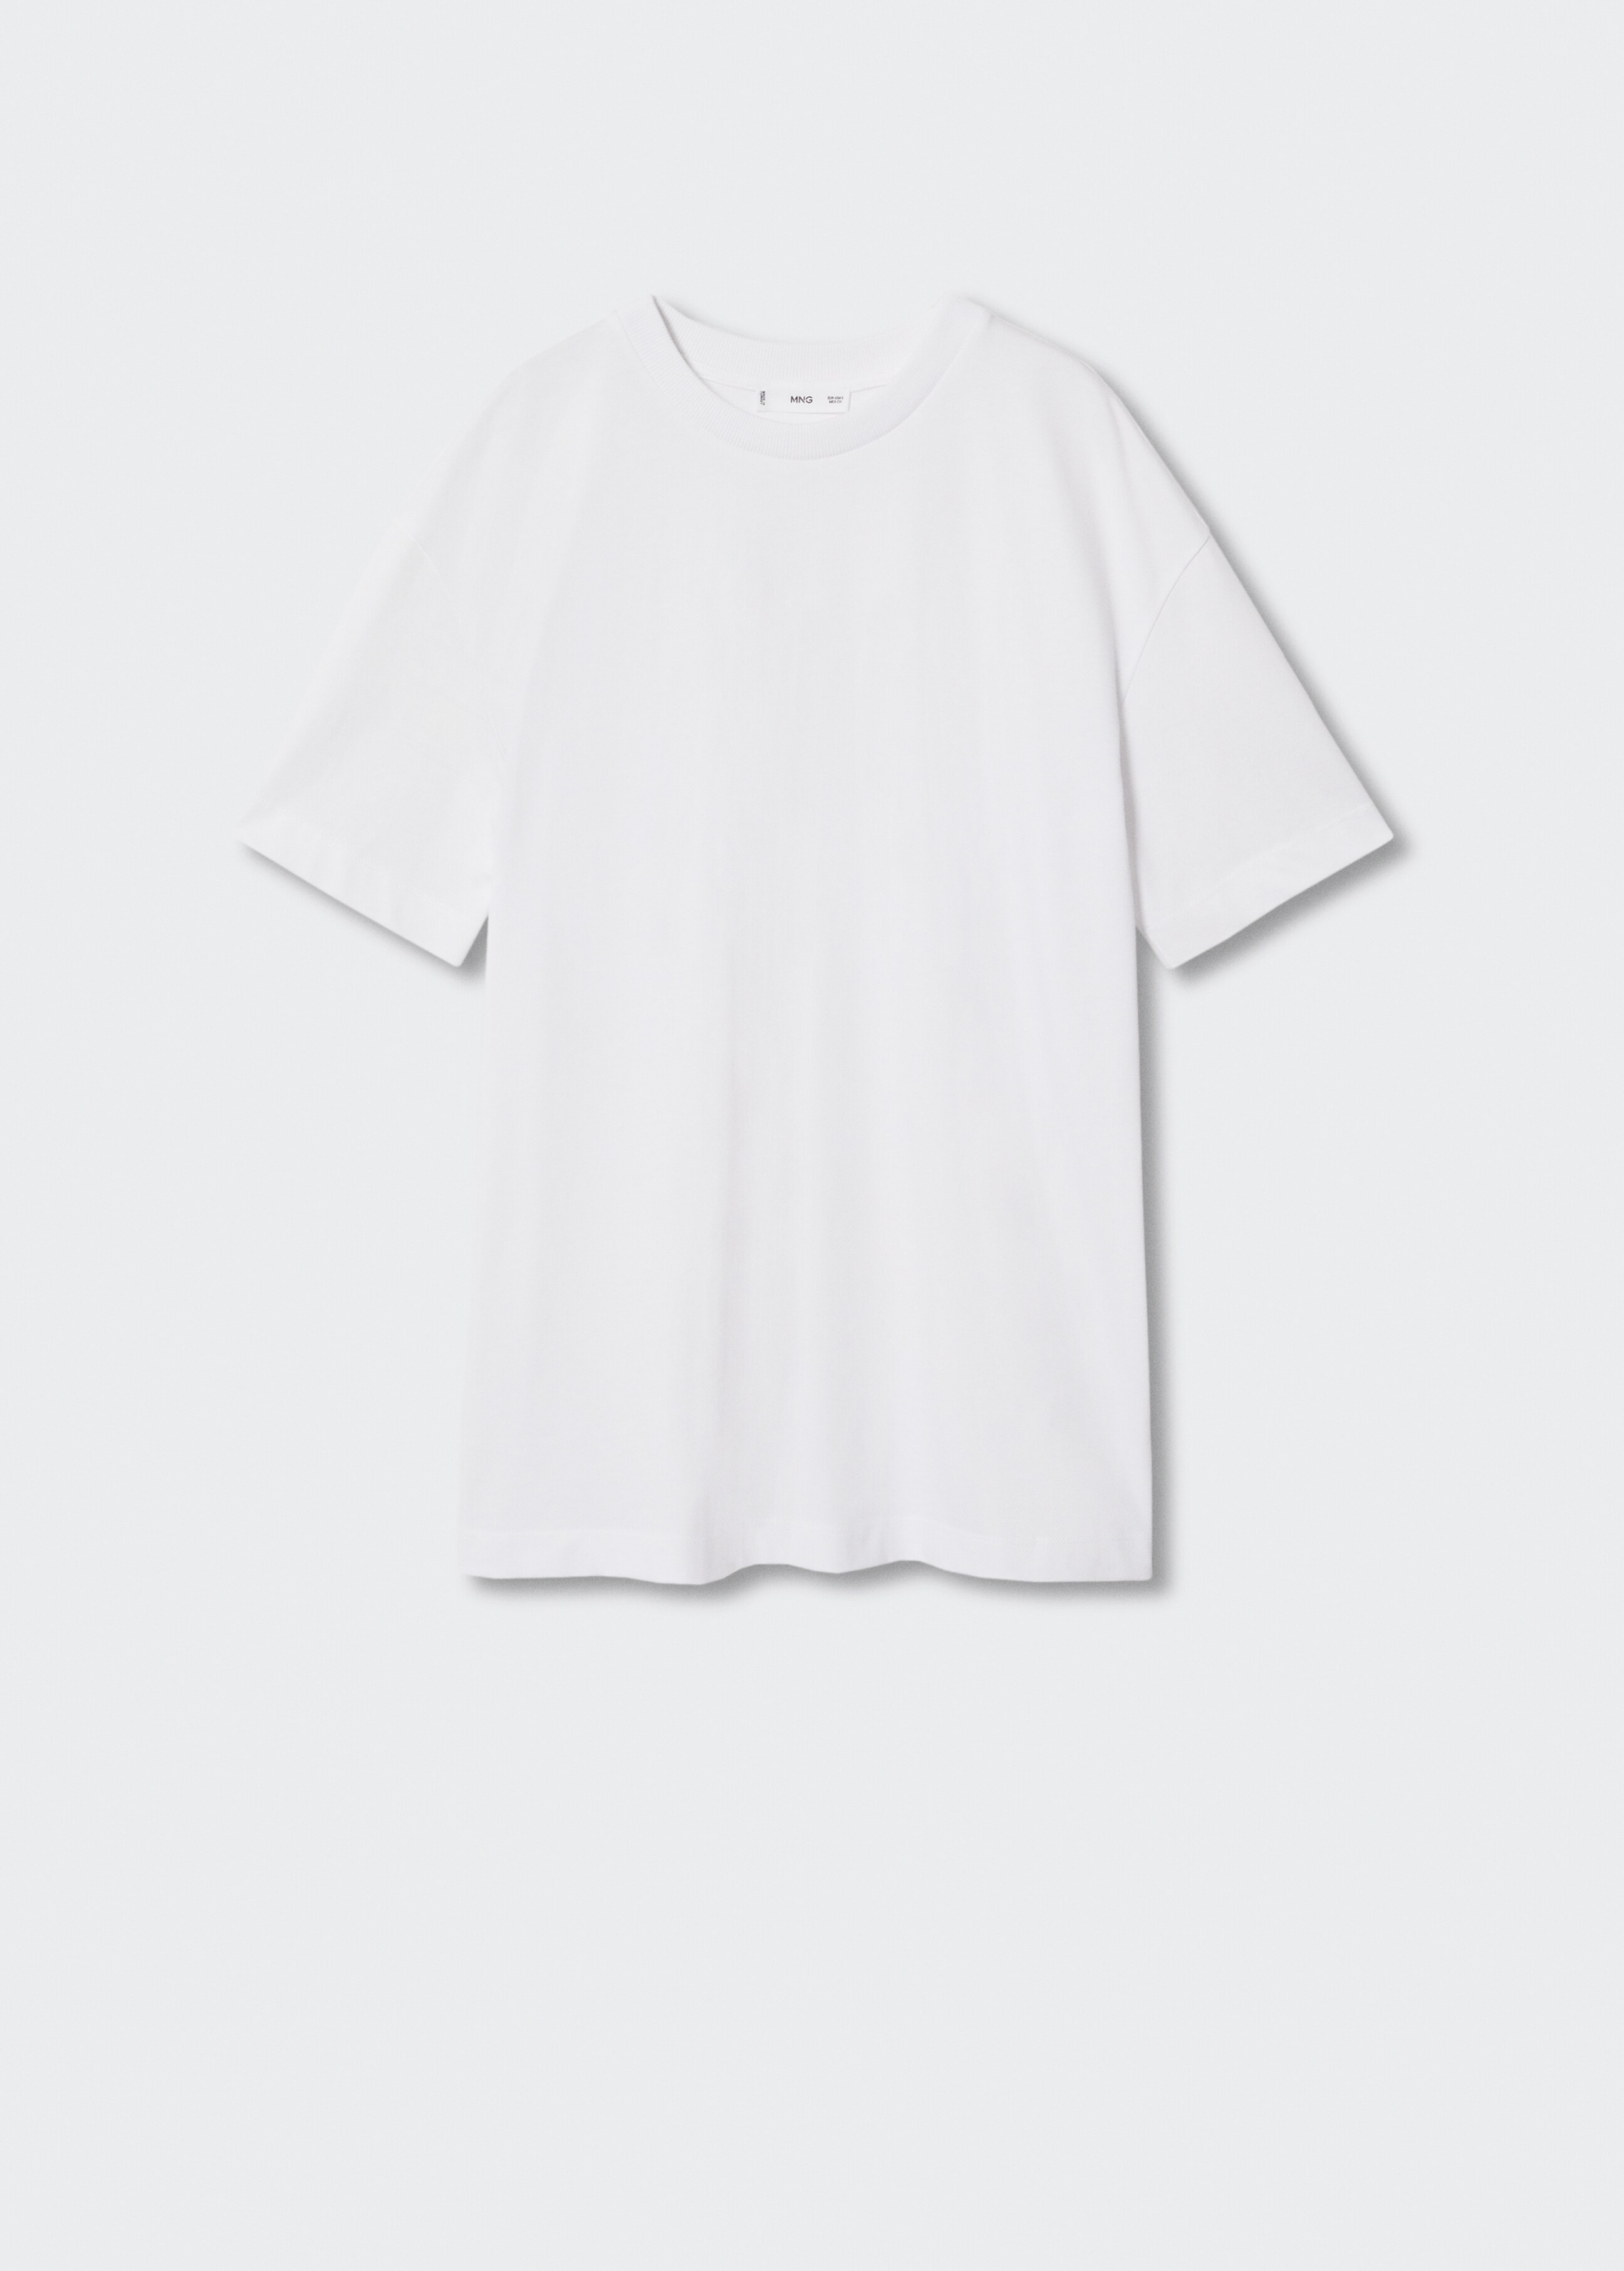 Oversize cotton T-shirt - Article without model